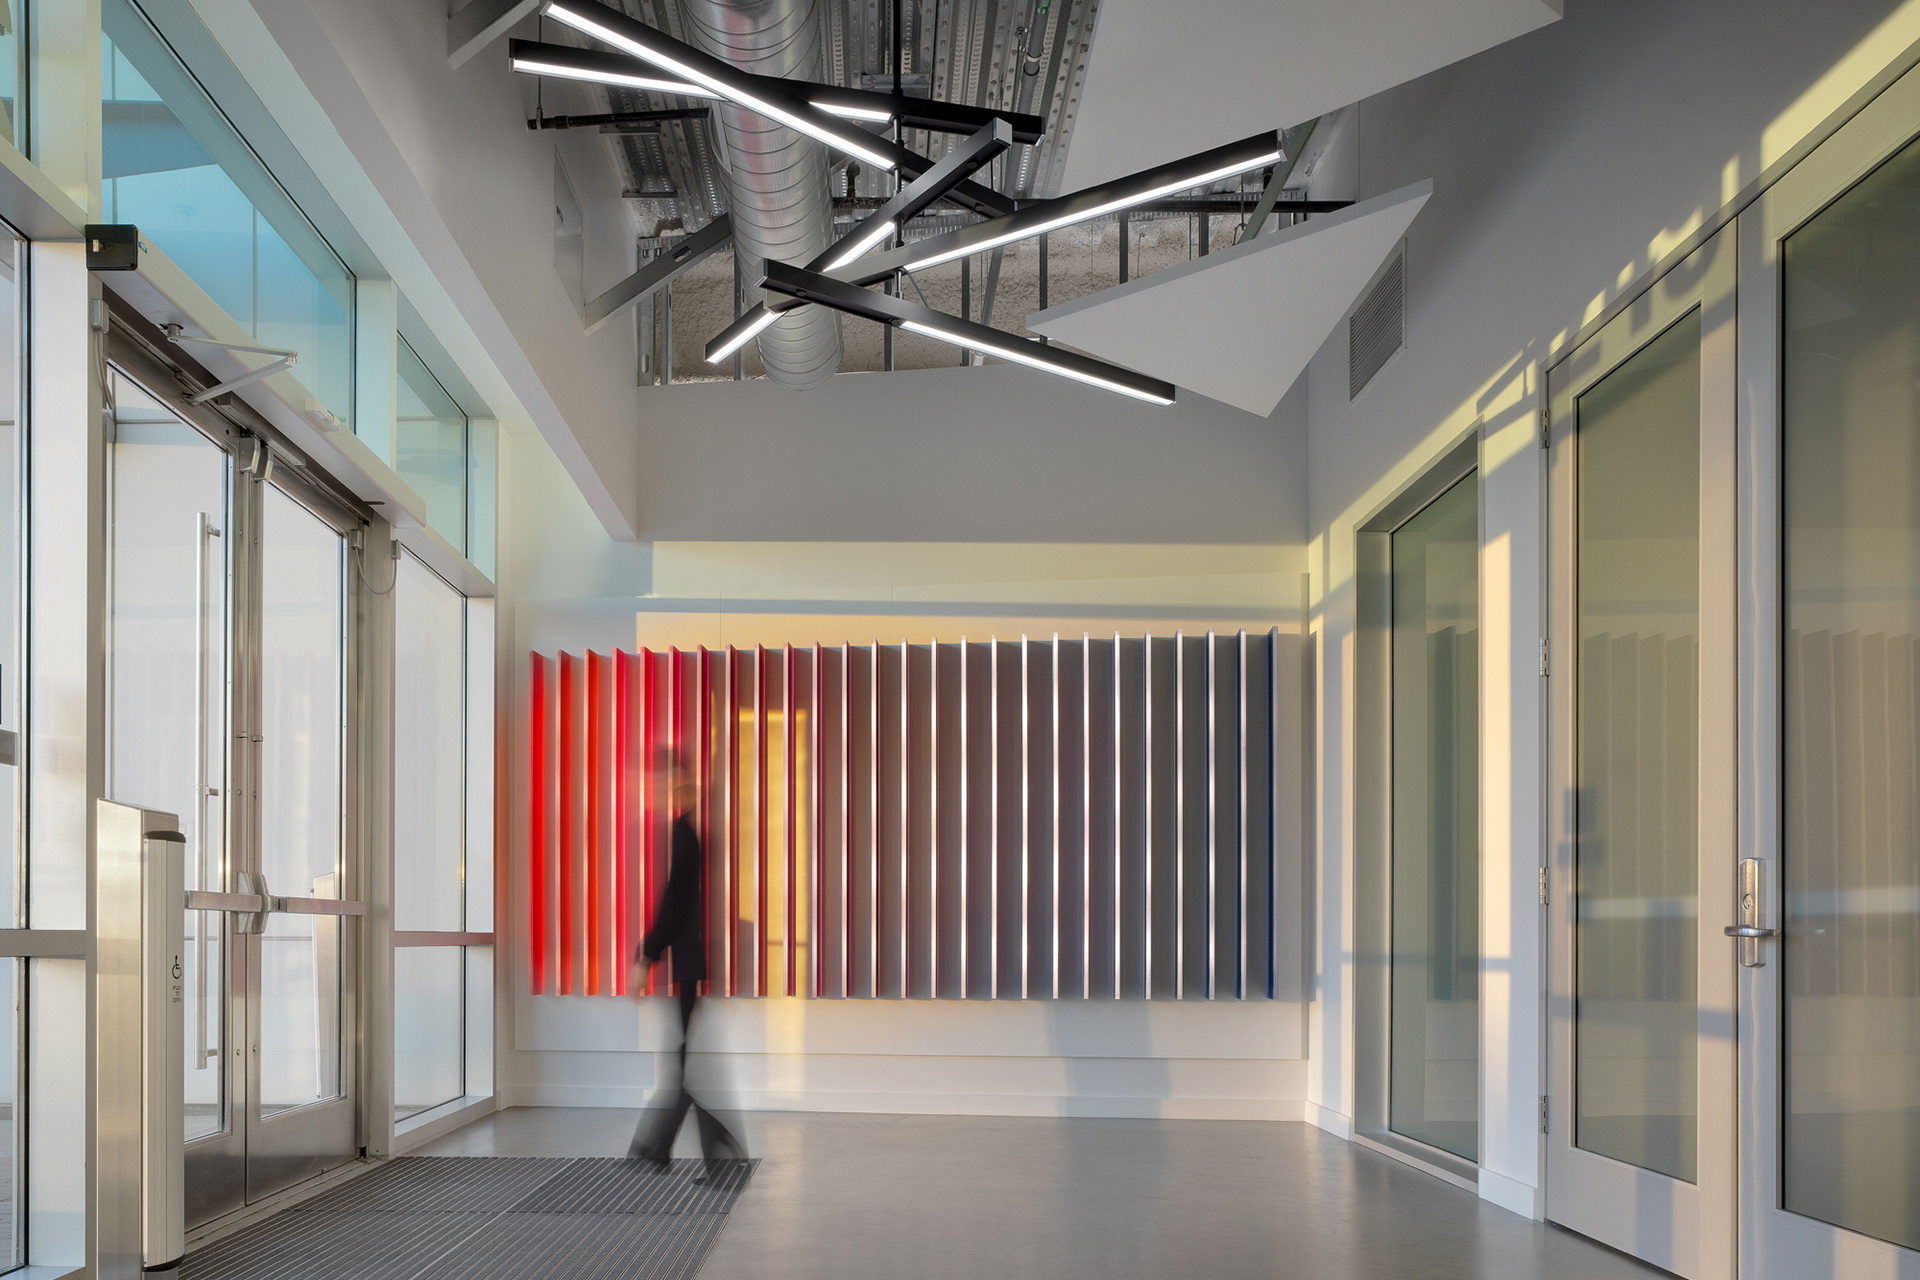 Interior at a confidential life science facility, entrance space with colorful wall lighting feature